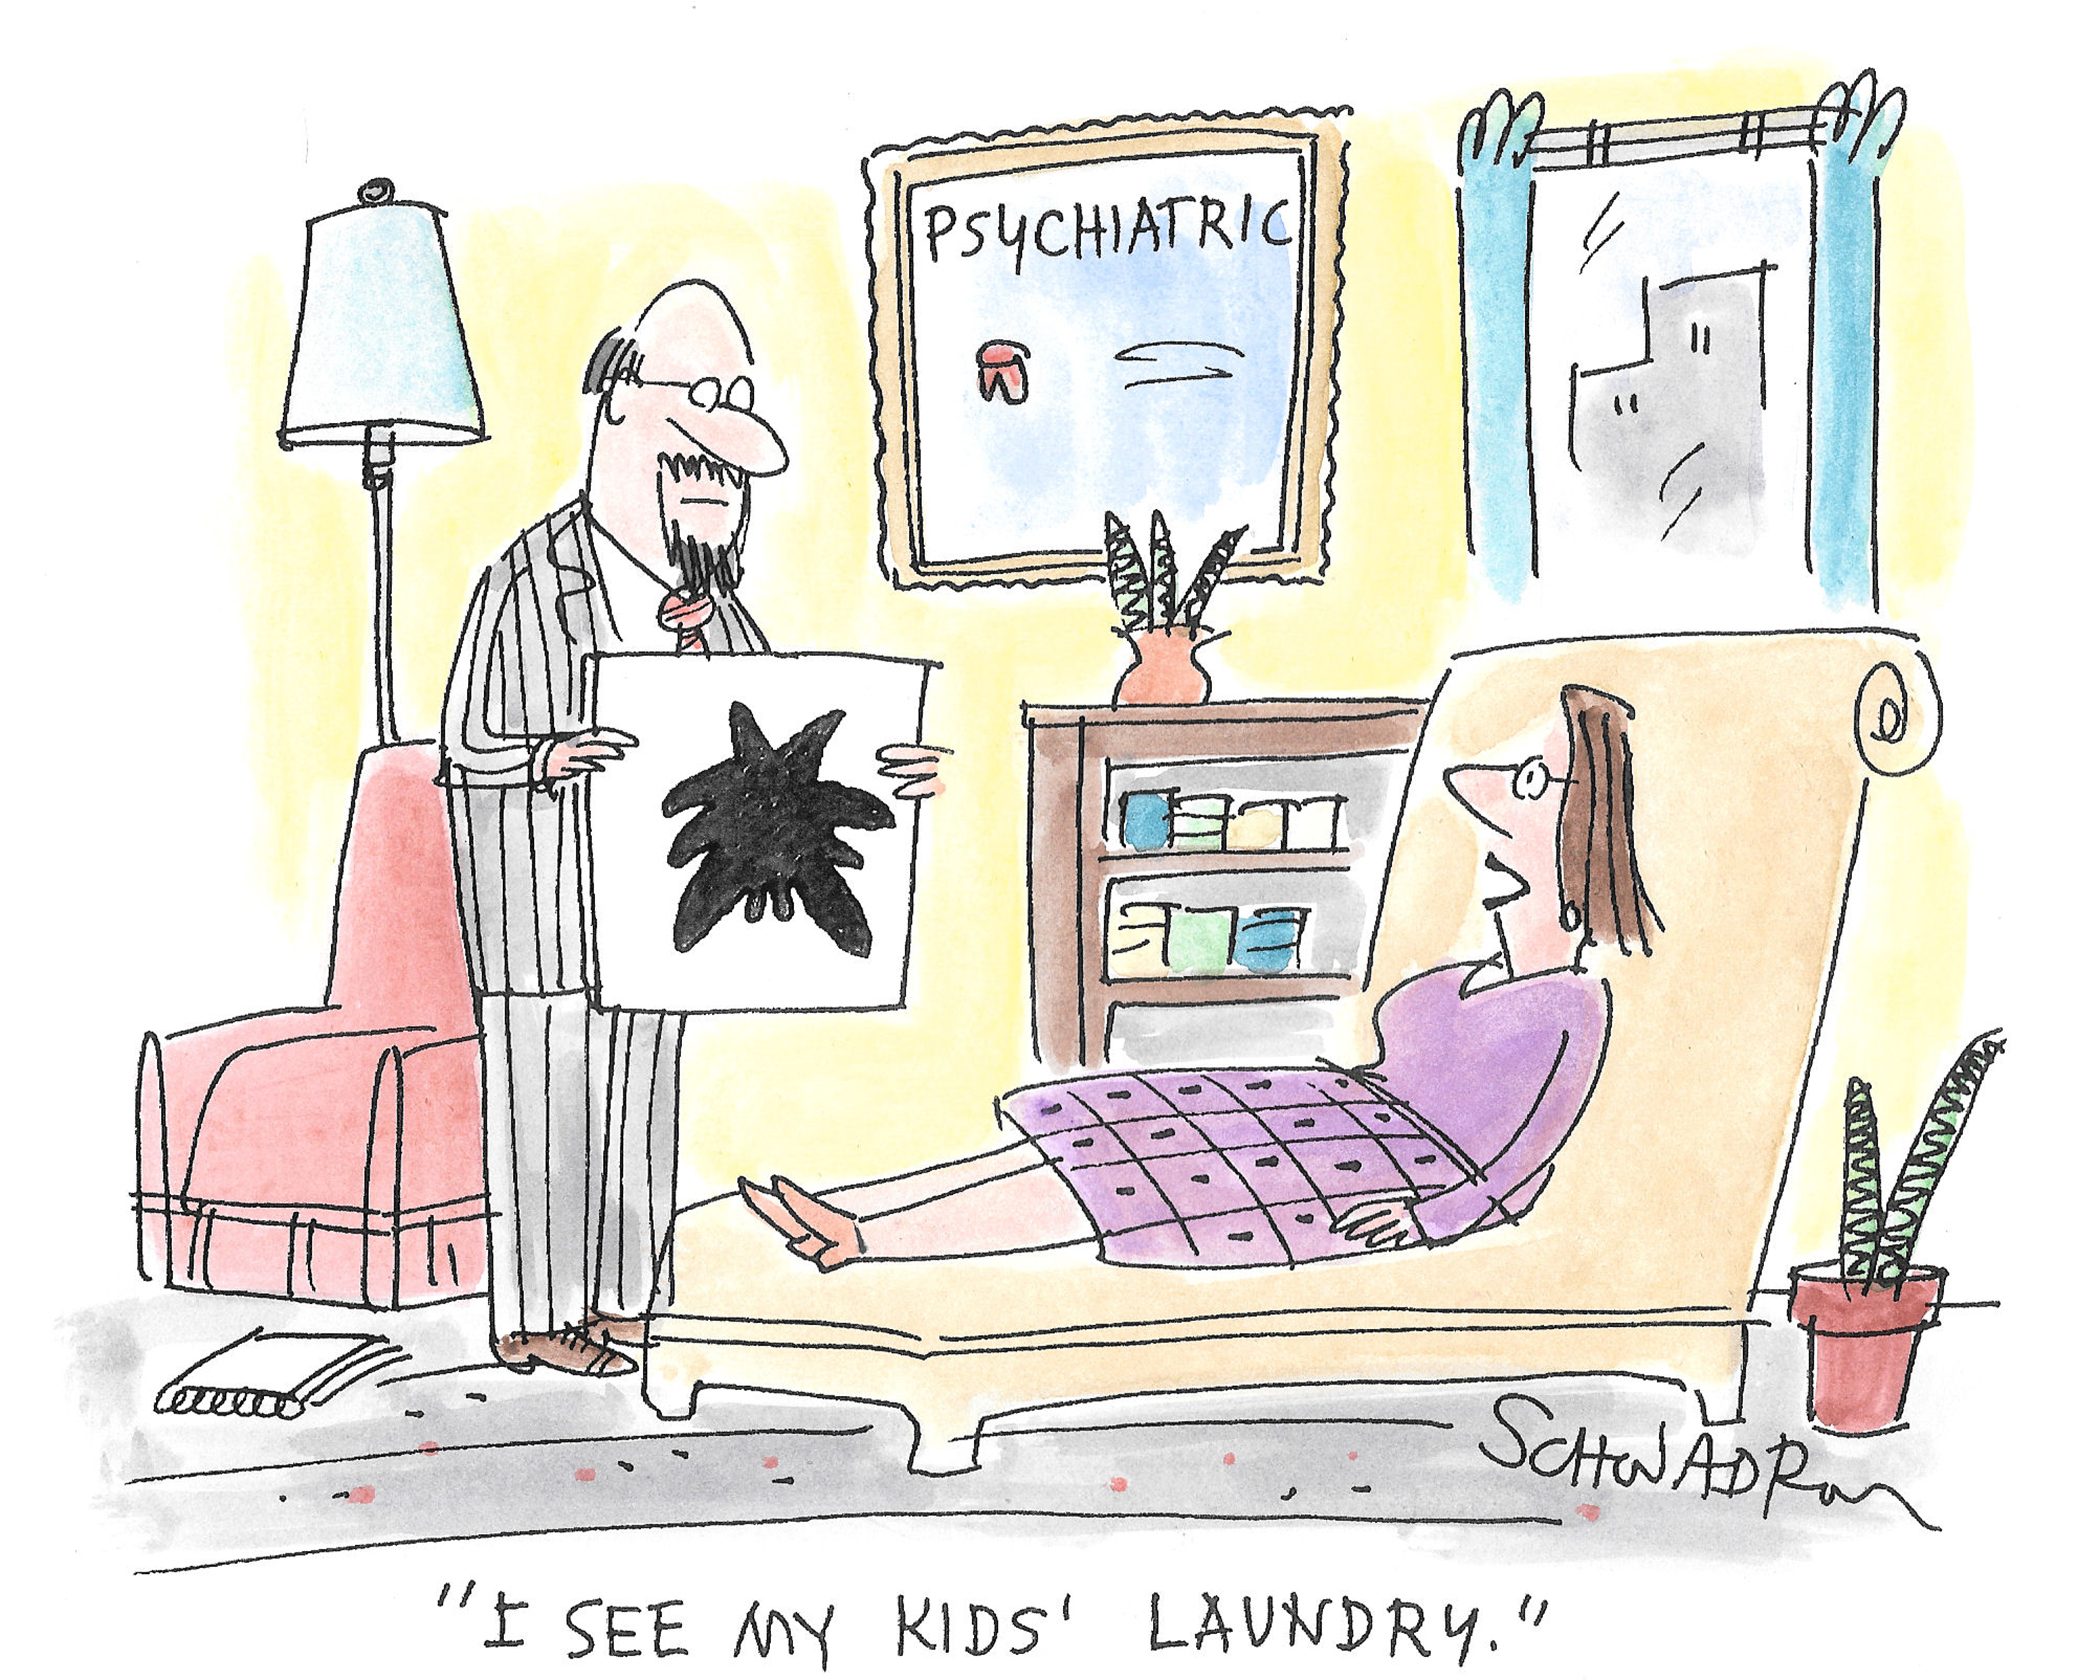 woman in a therapists office looking at an inkblot says, "i see my kids laundry"